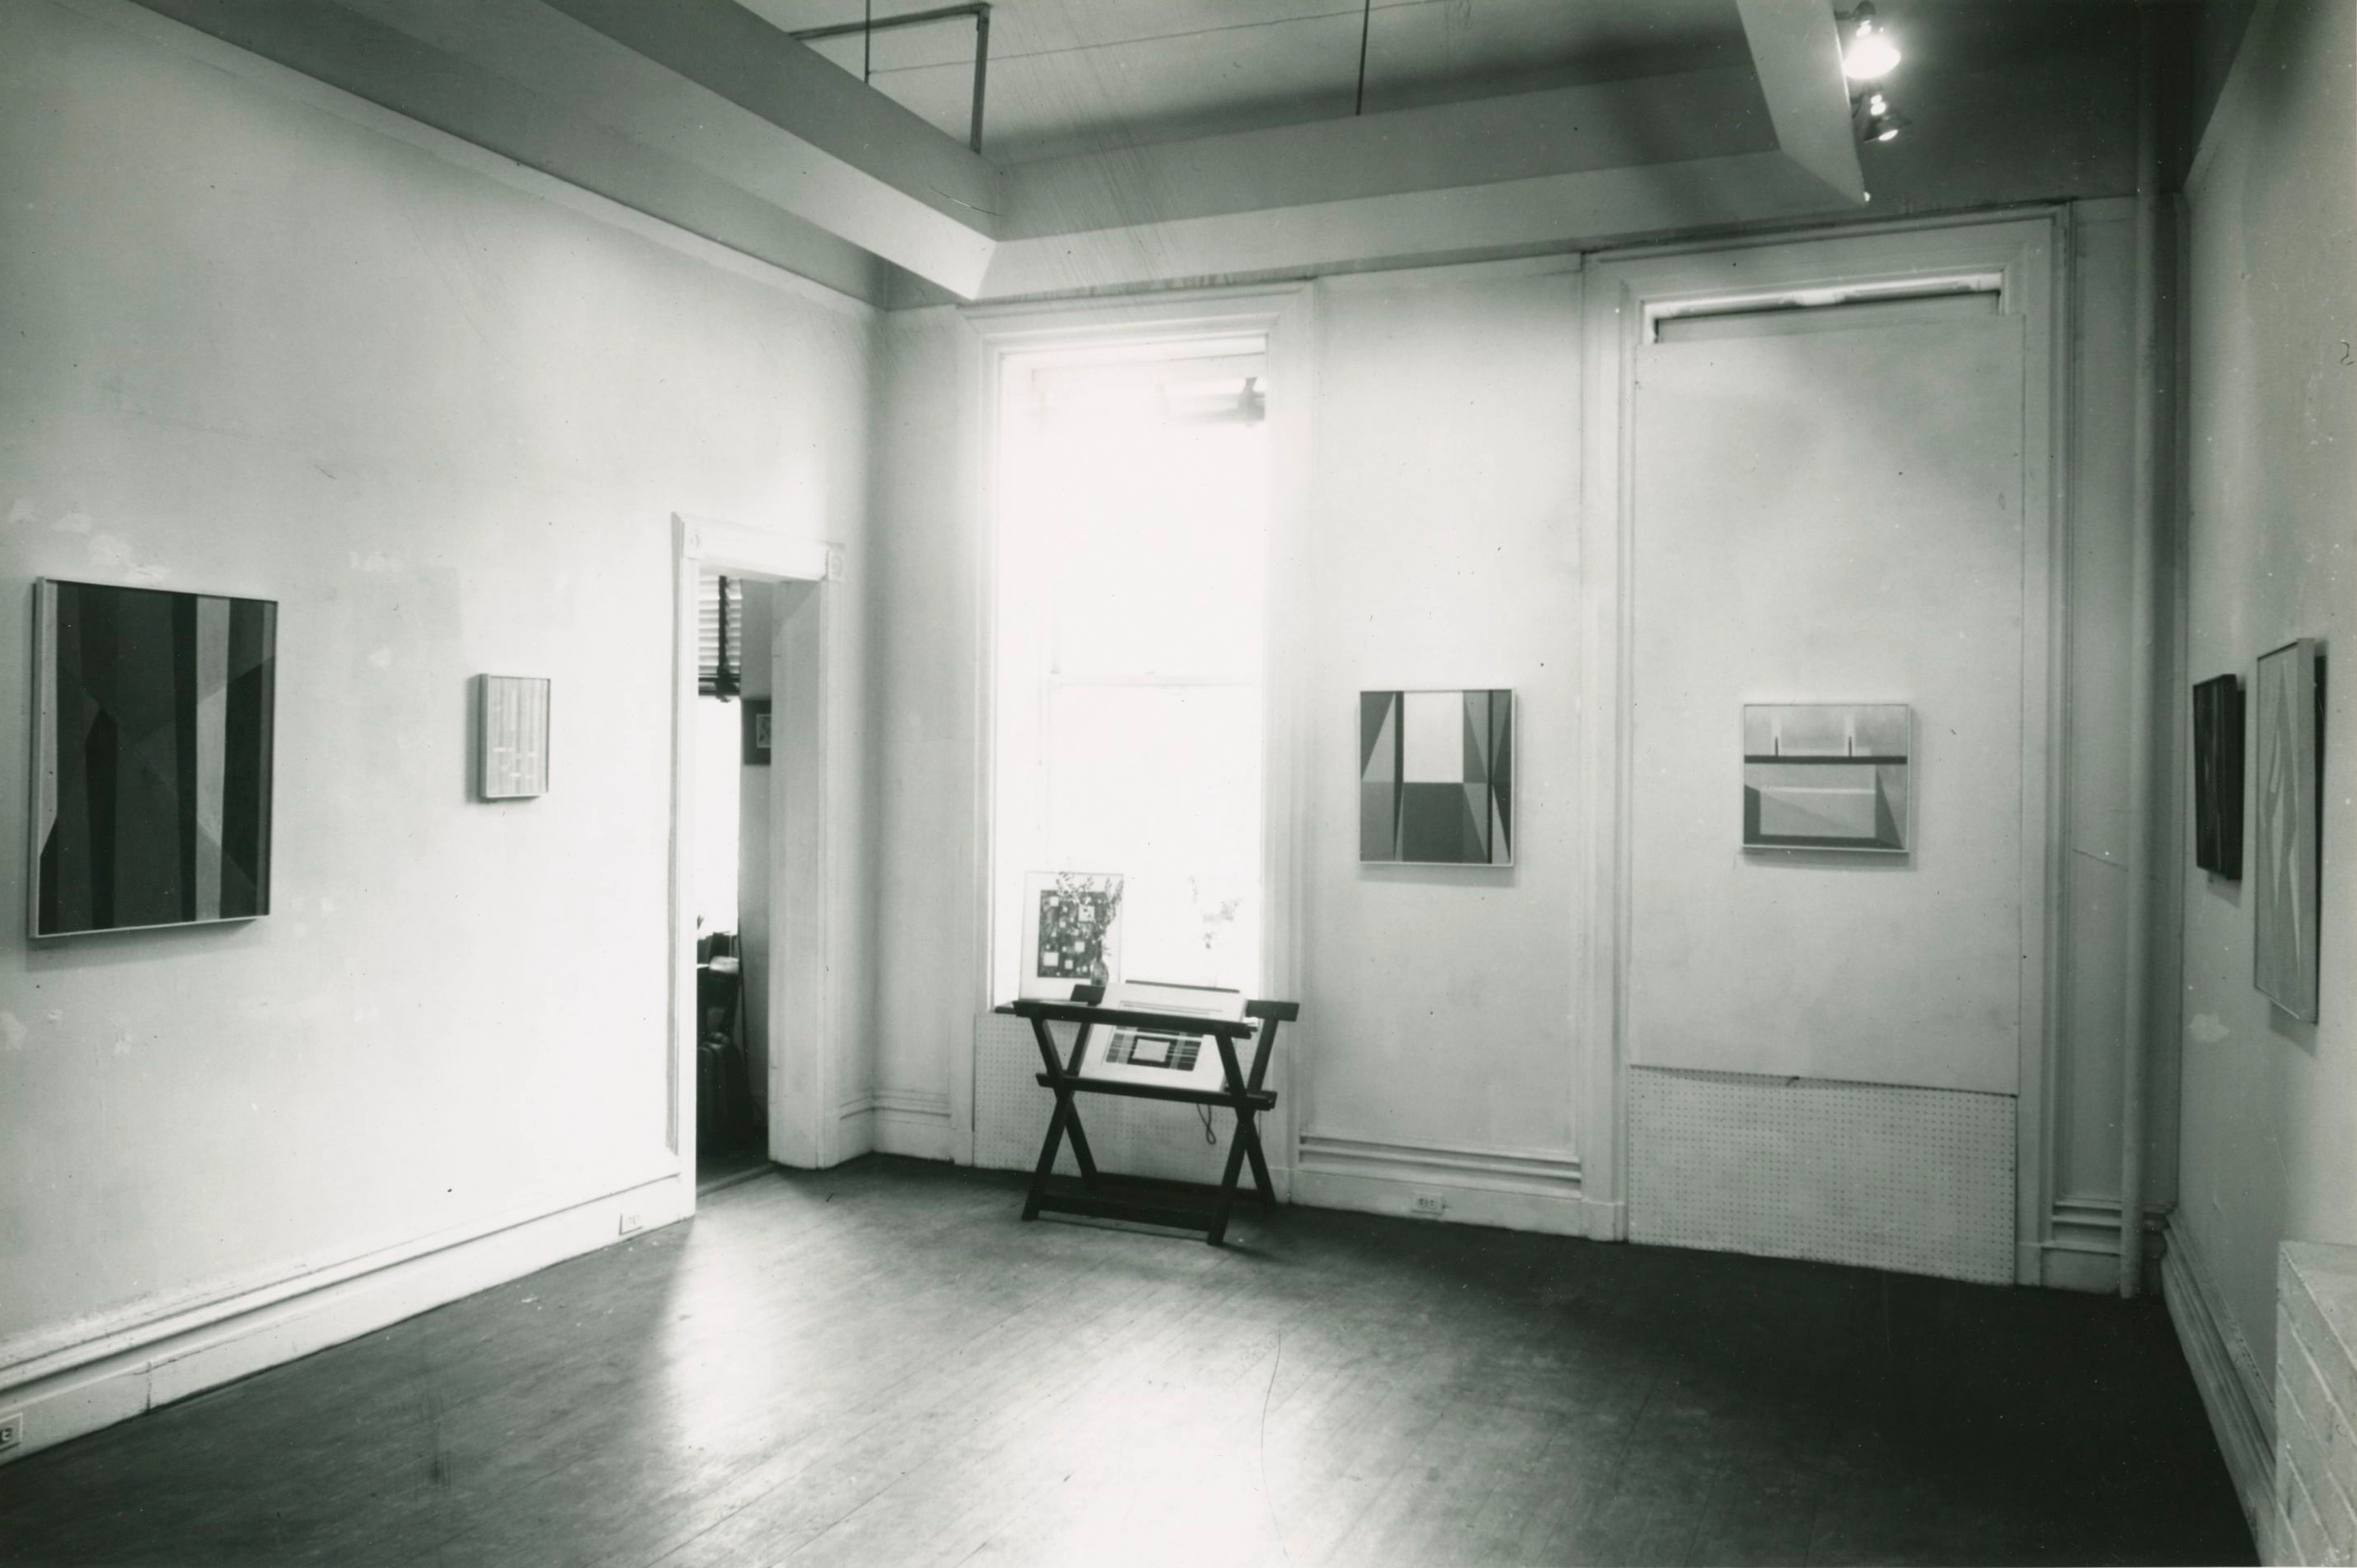 Black and white photograph from 1959 of a gallery interior, with six canvases displayed over three walls, and a window with a small display of prints in front.